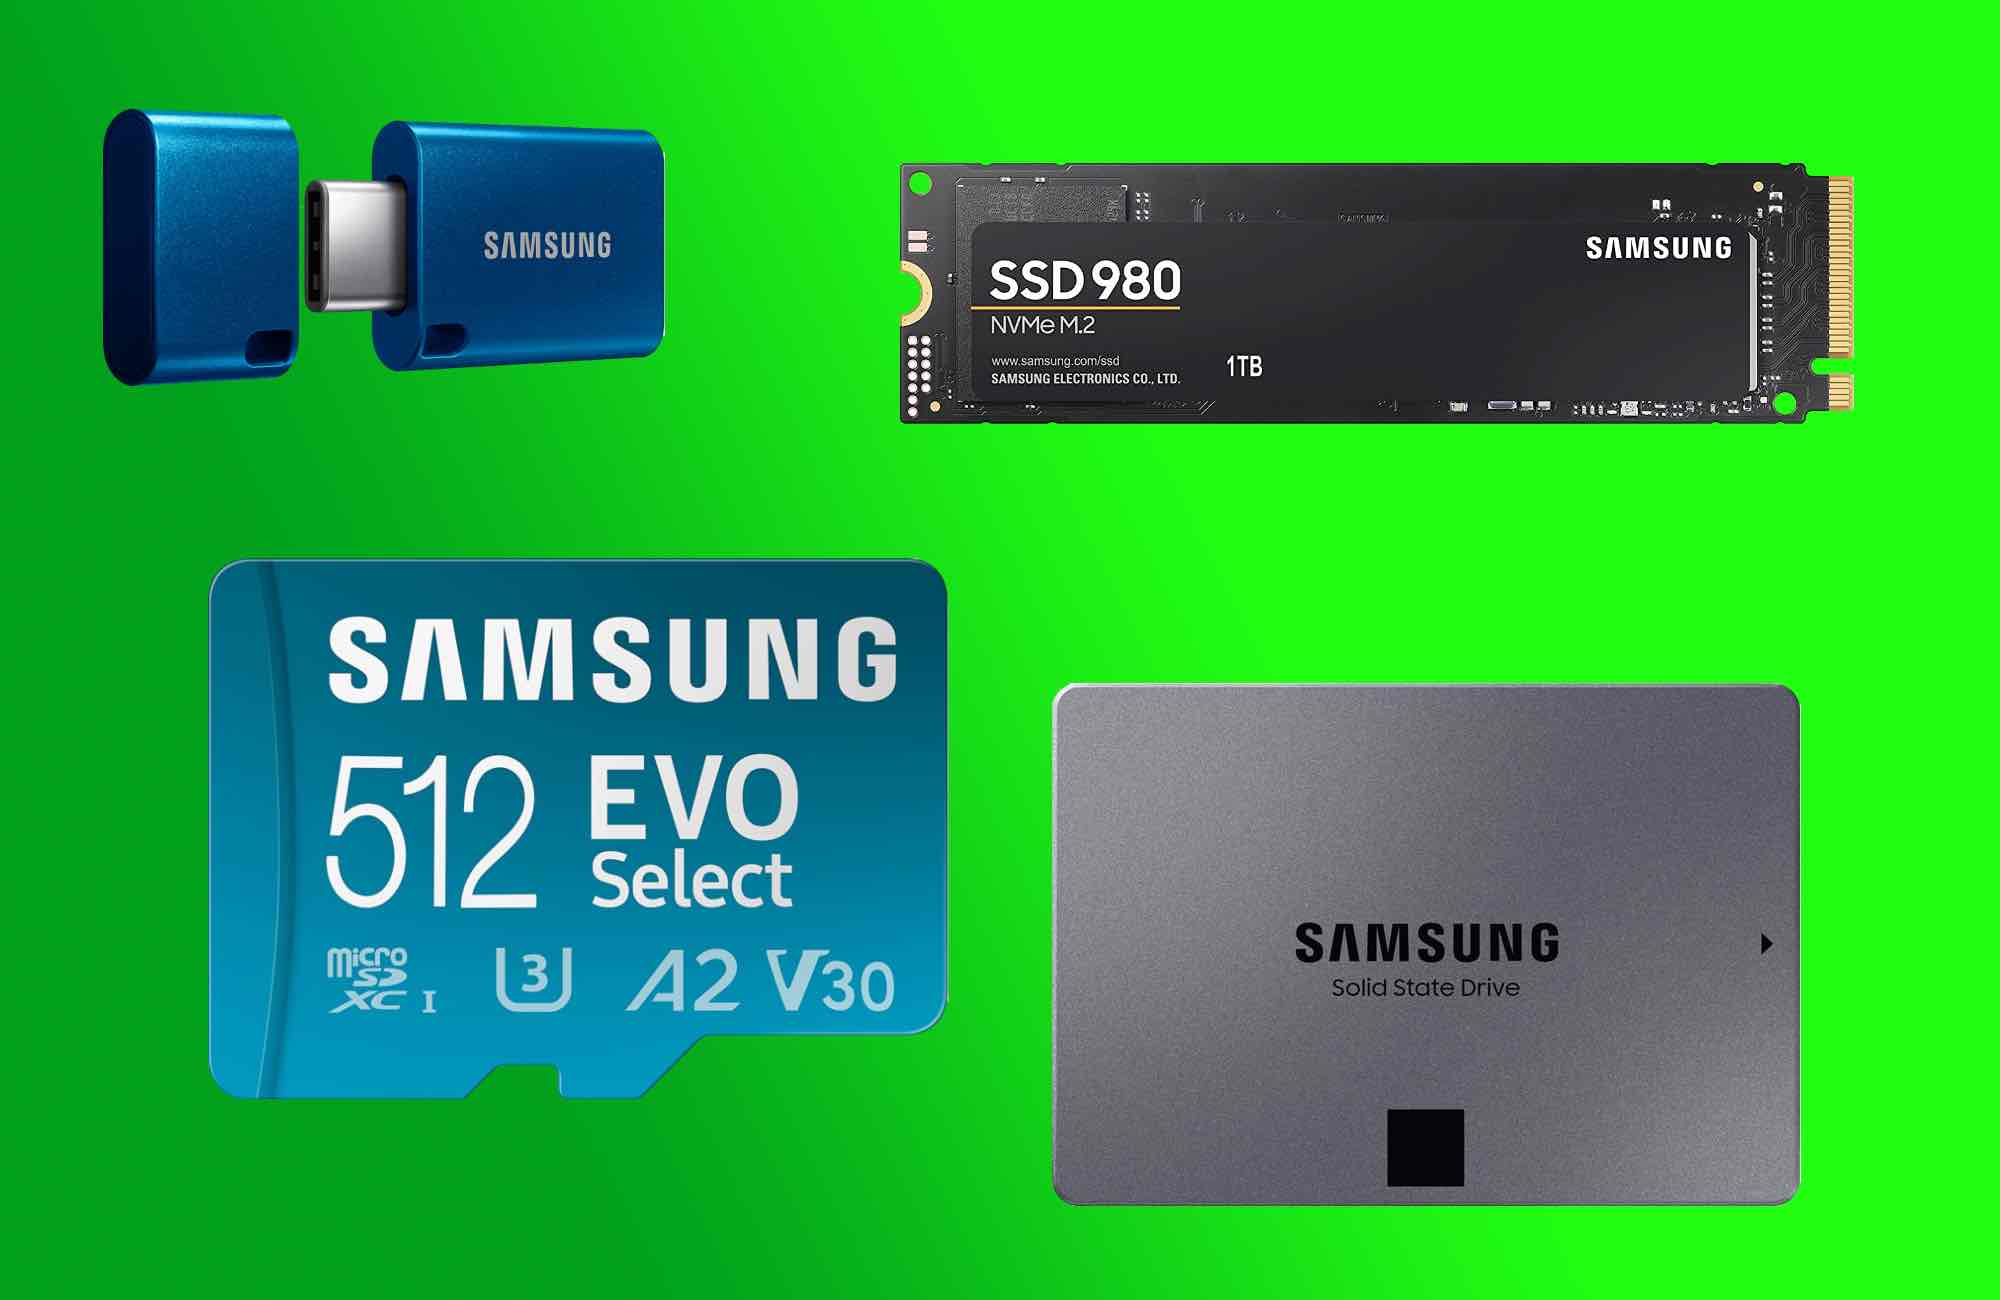 Back-up and save with Samsung storage on Amazon